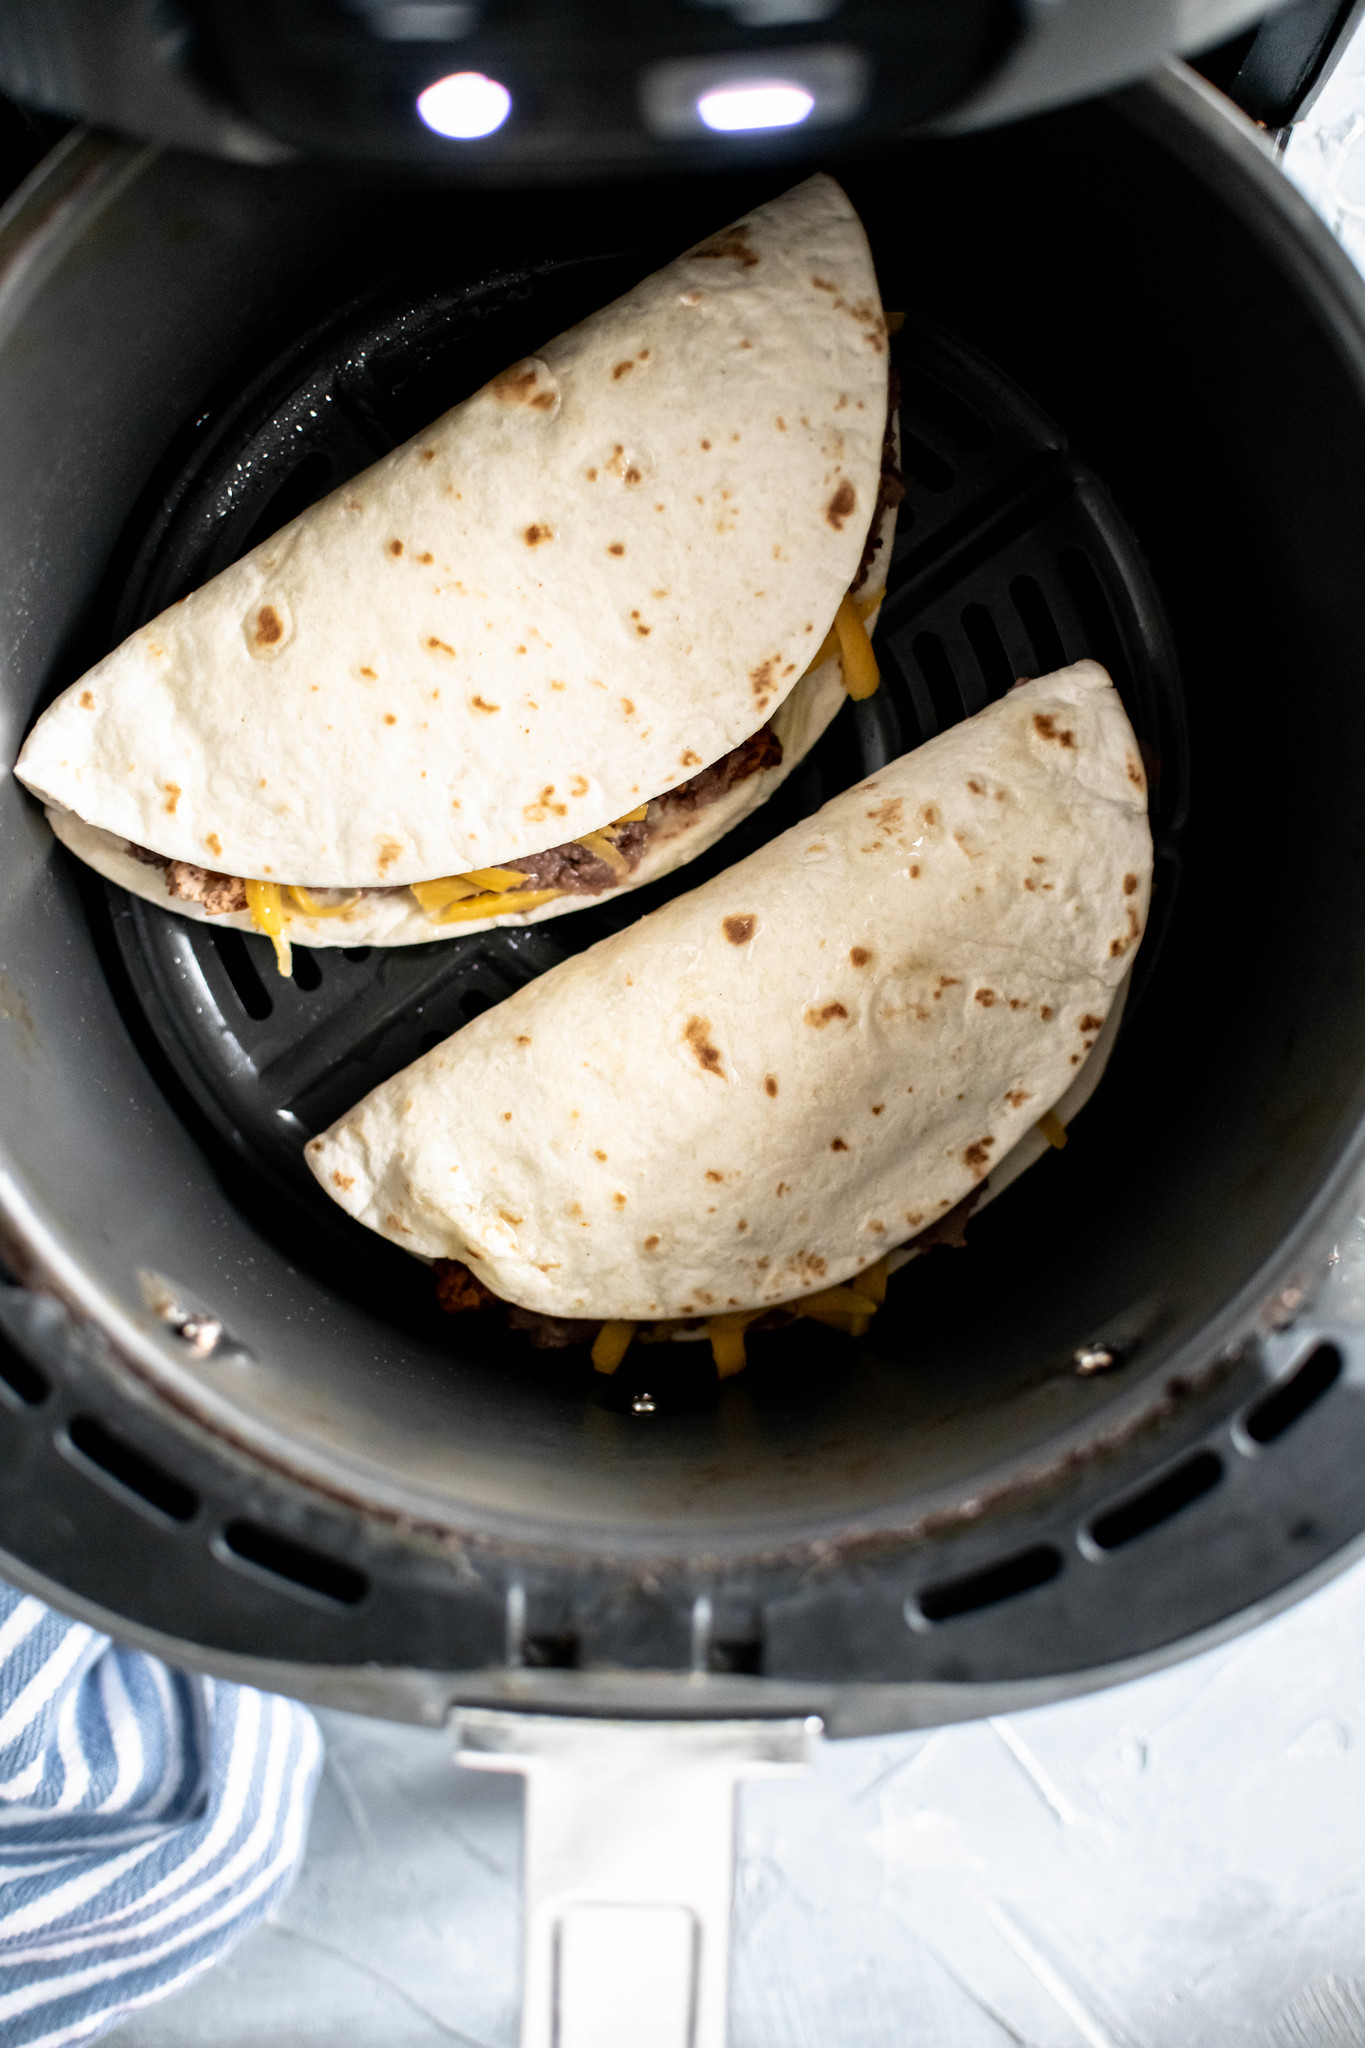 Two tacos in the air fryer.